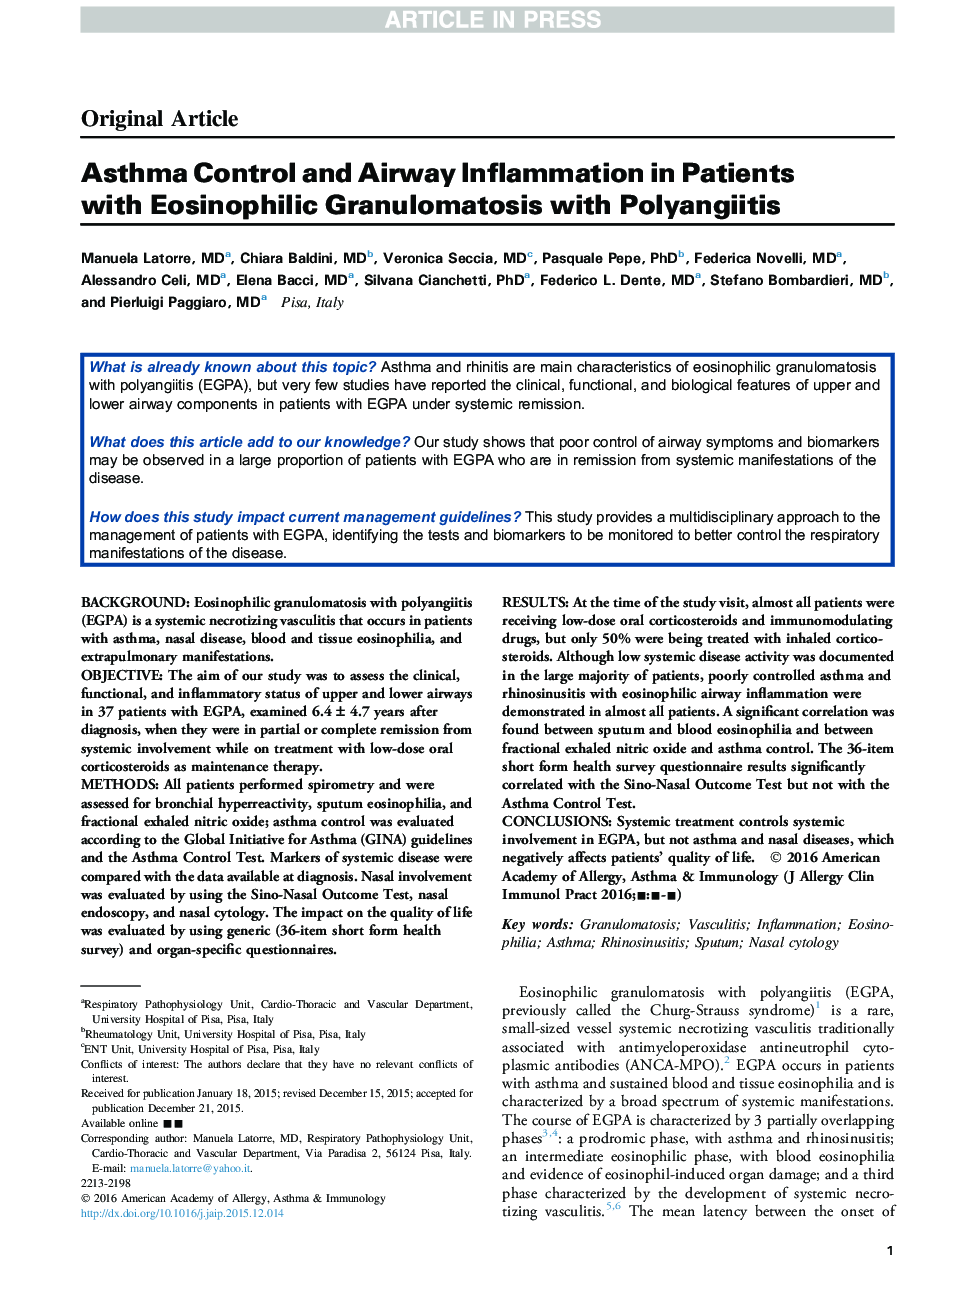 Asthma Control and Airway Inflammation in Patients with Eosinophilic Granulomatosis with Polyangiitis